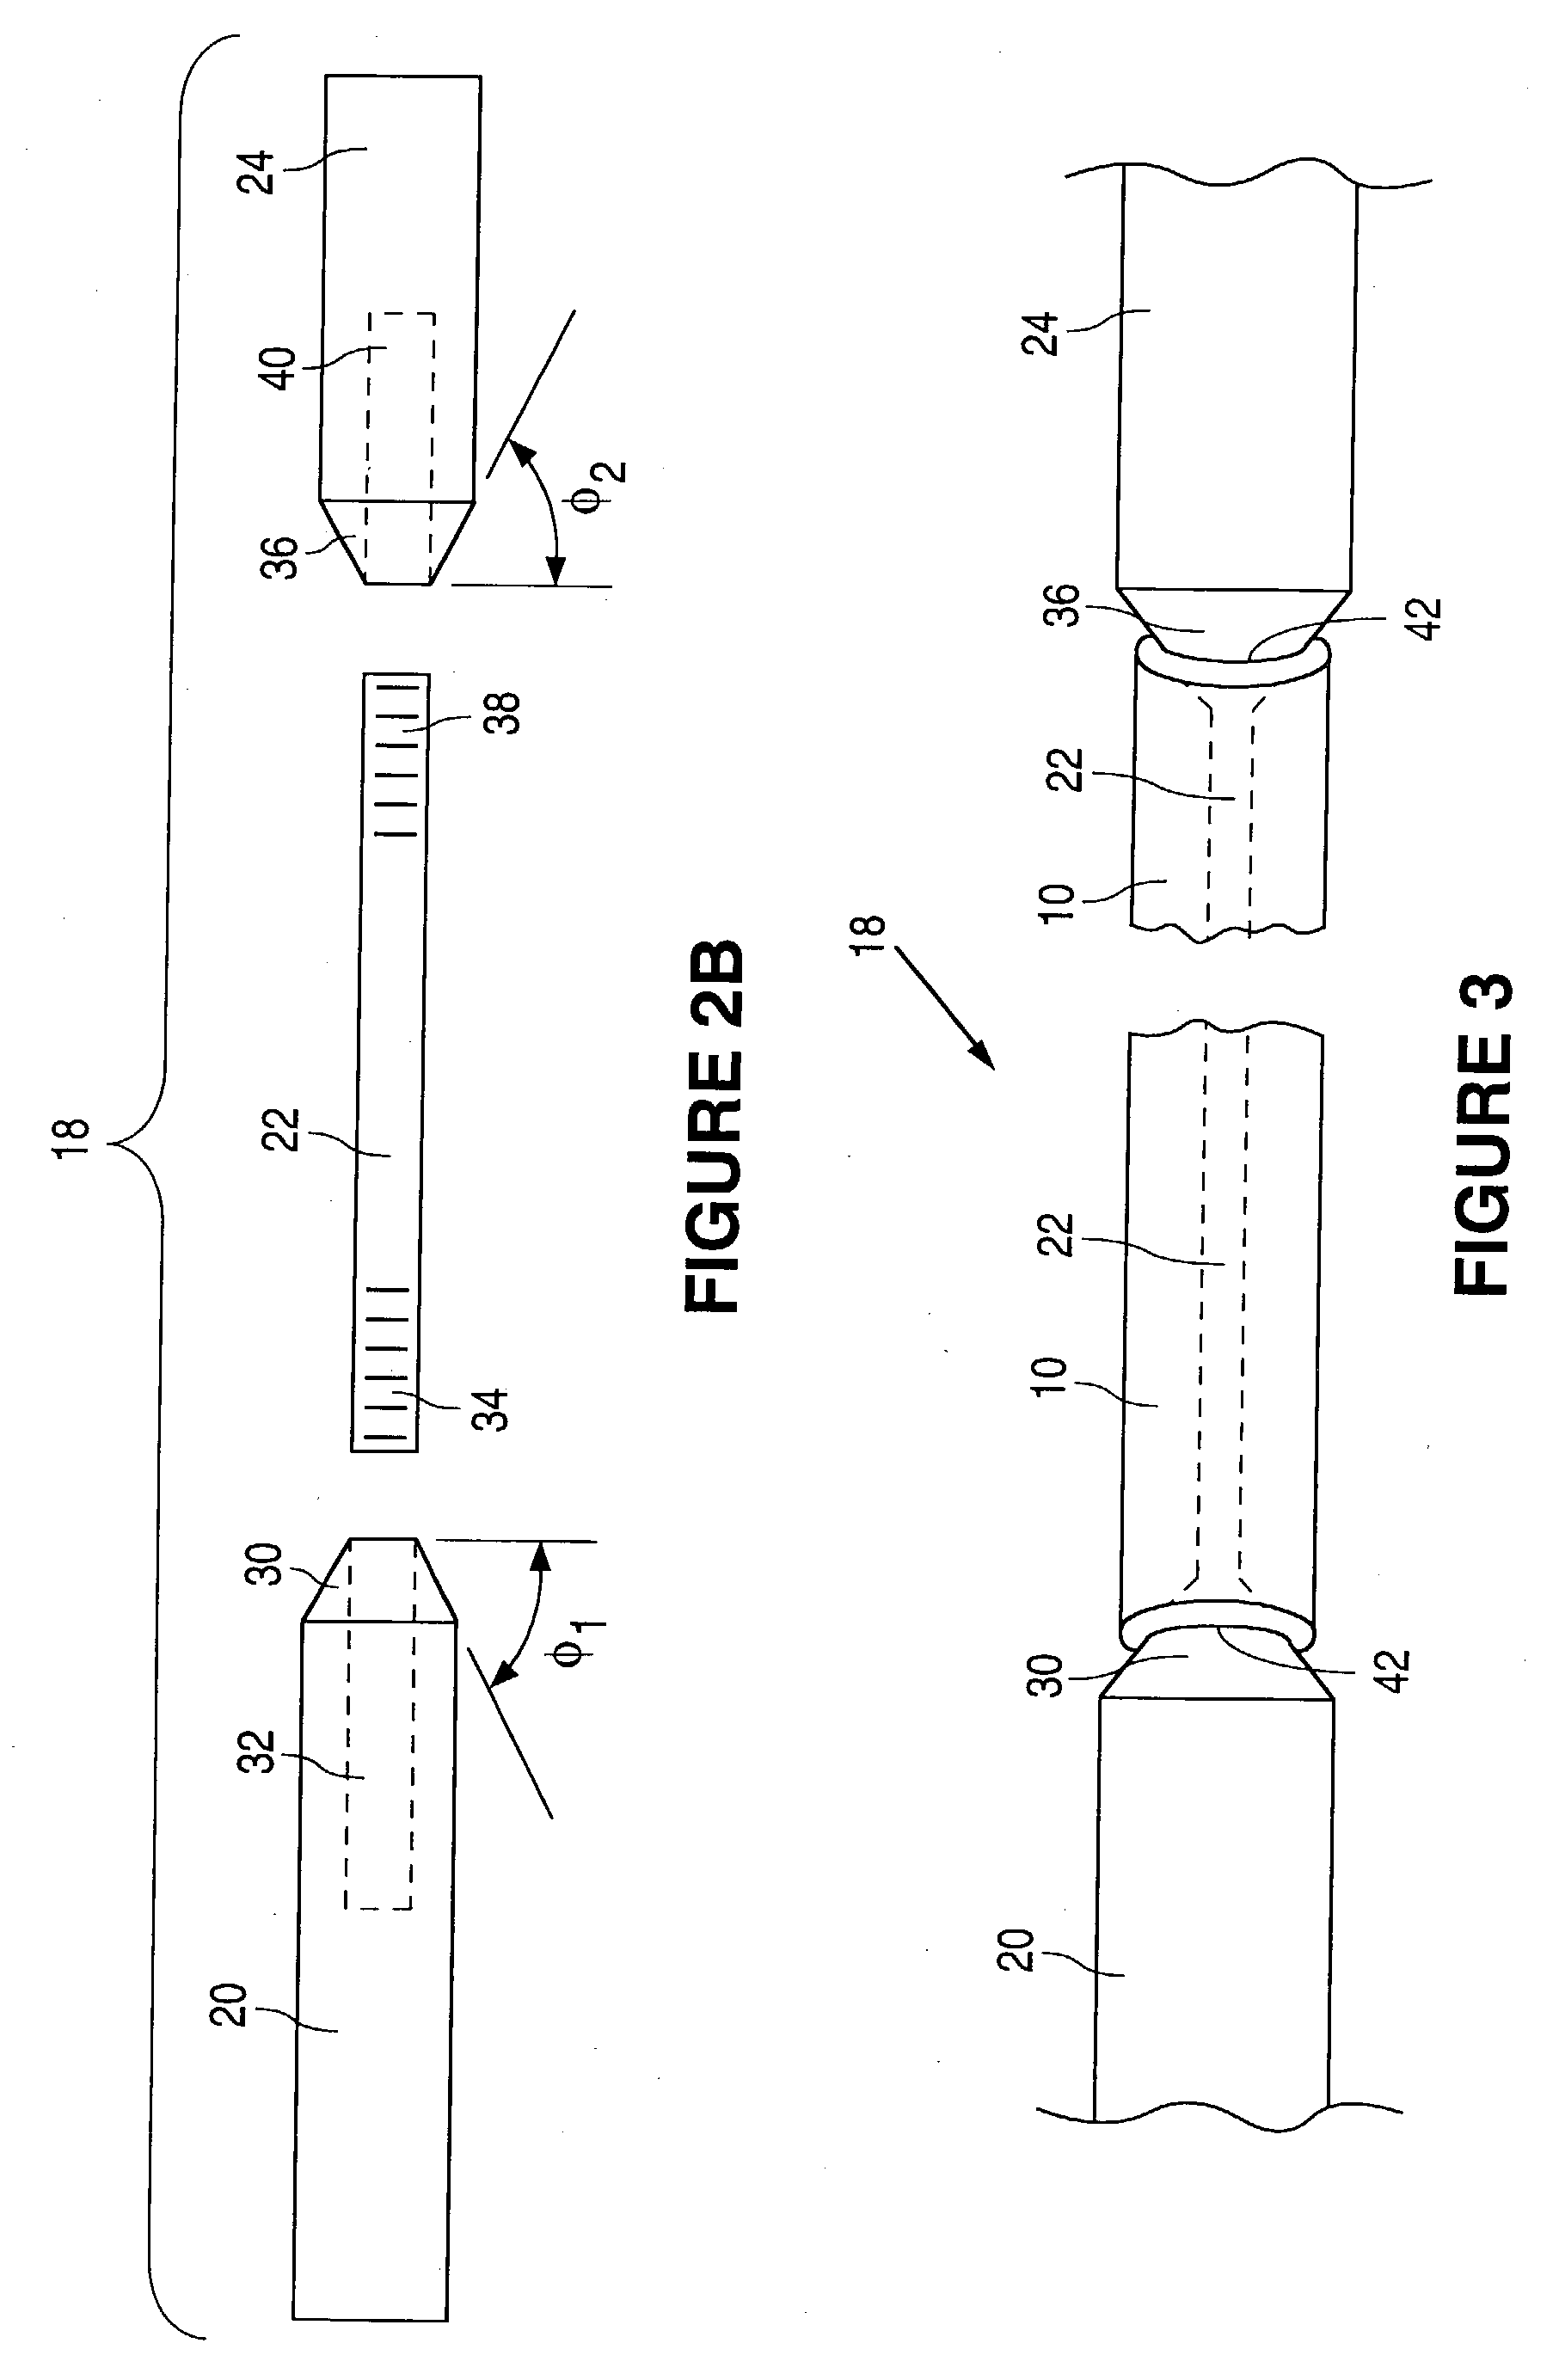 Stent mounting device and a method of using the same to coat a stent